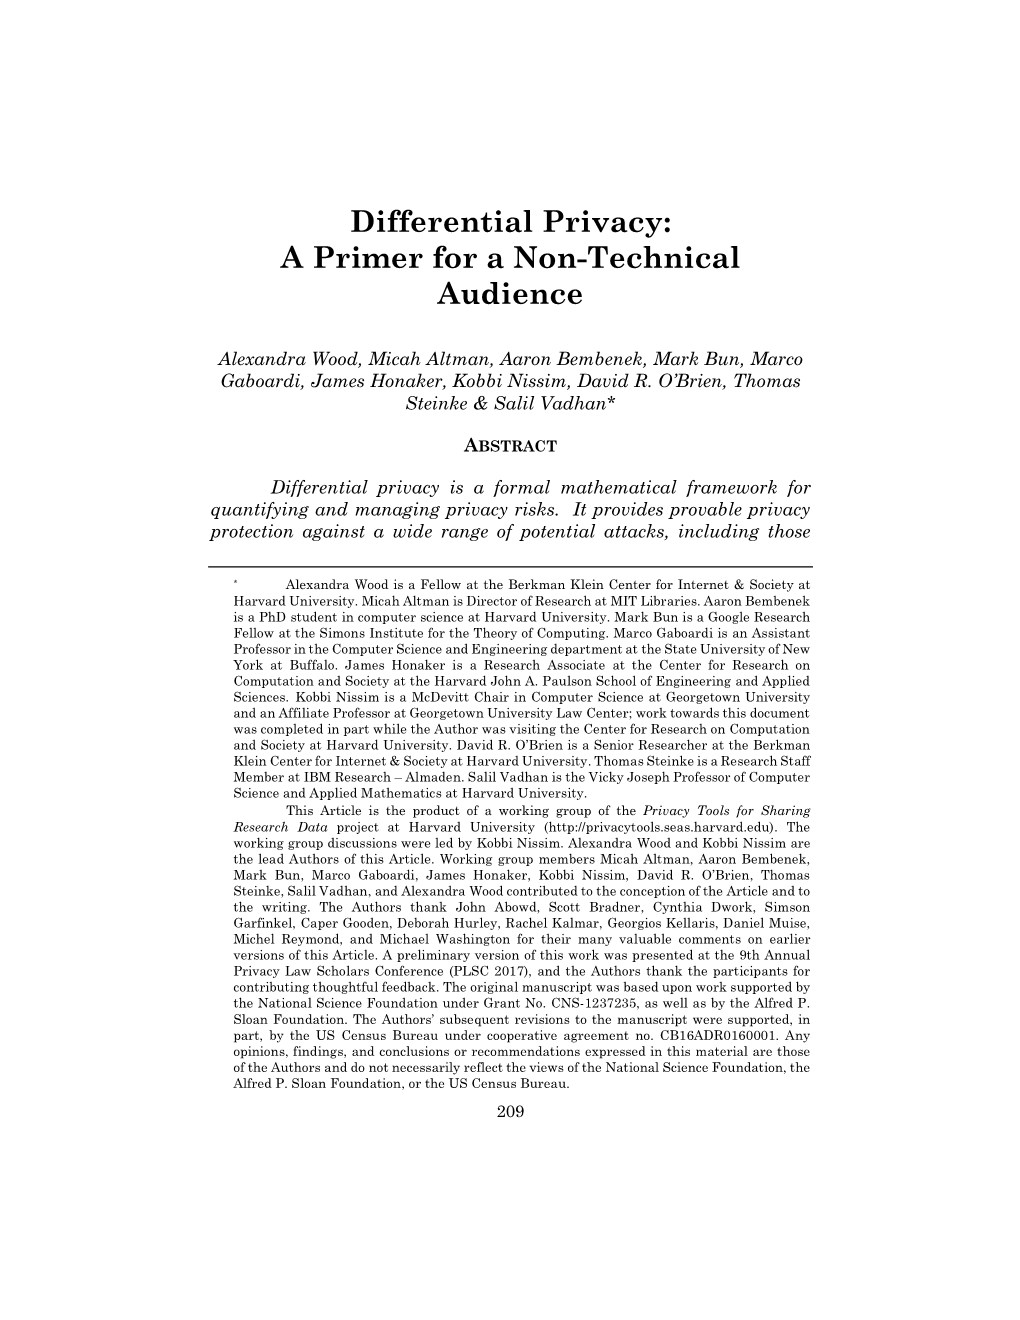 Differential Privacy: a Primer for a Non-Technical Audience